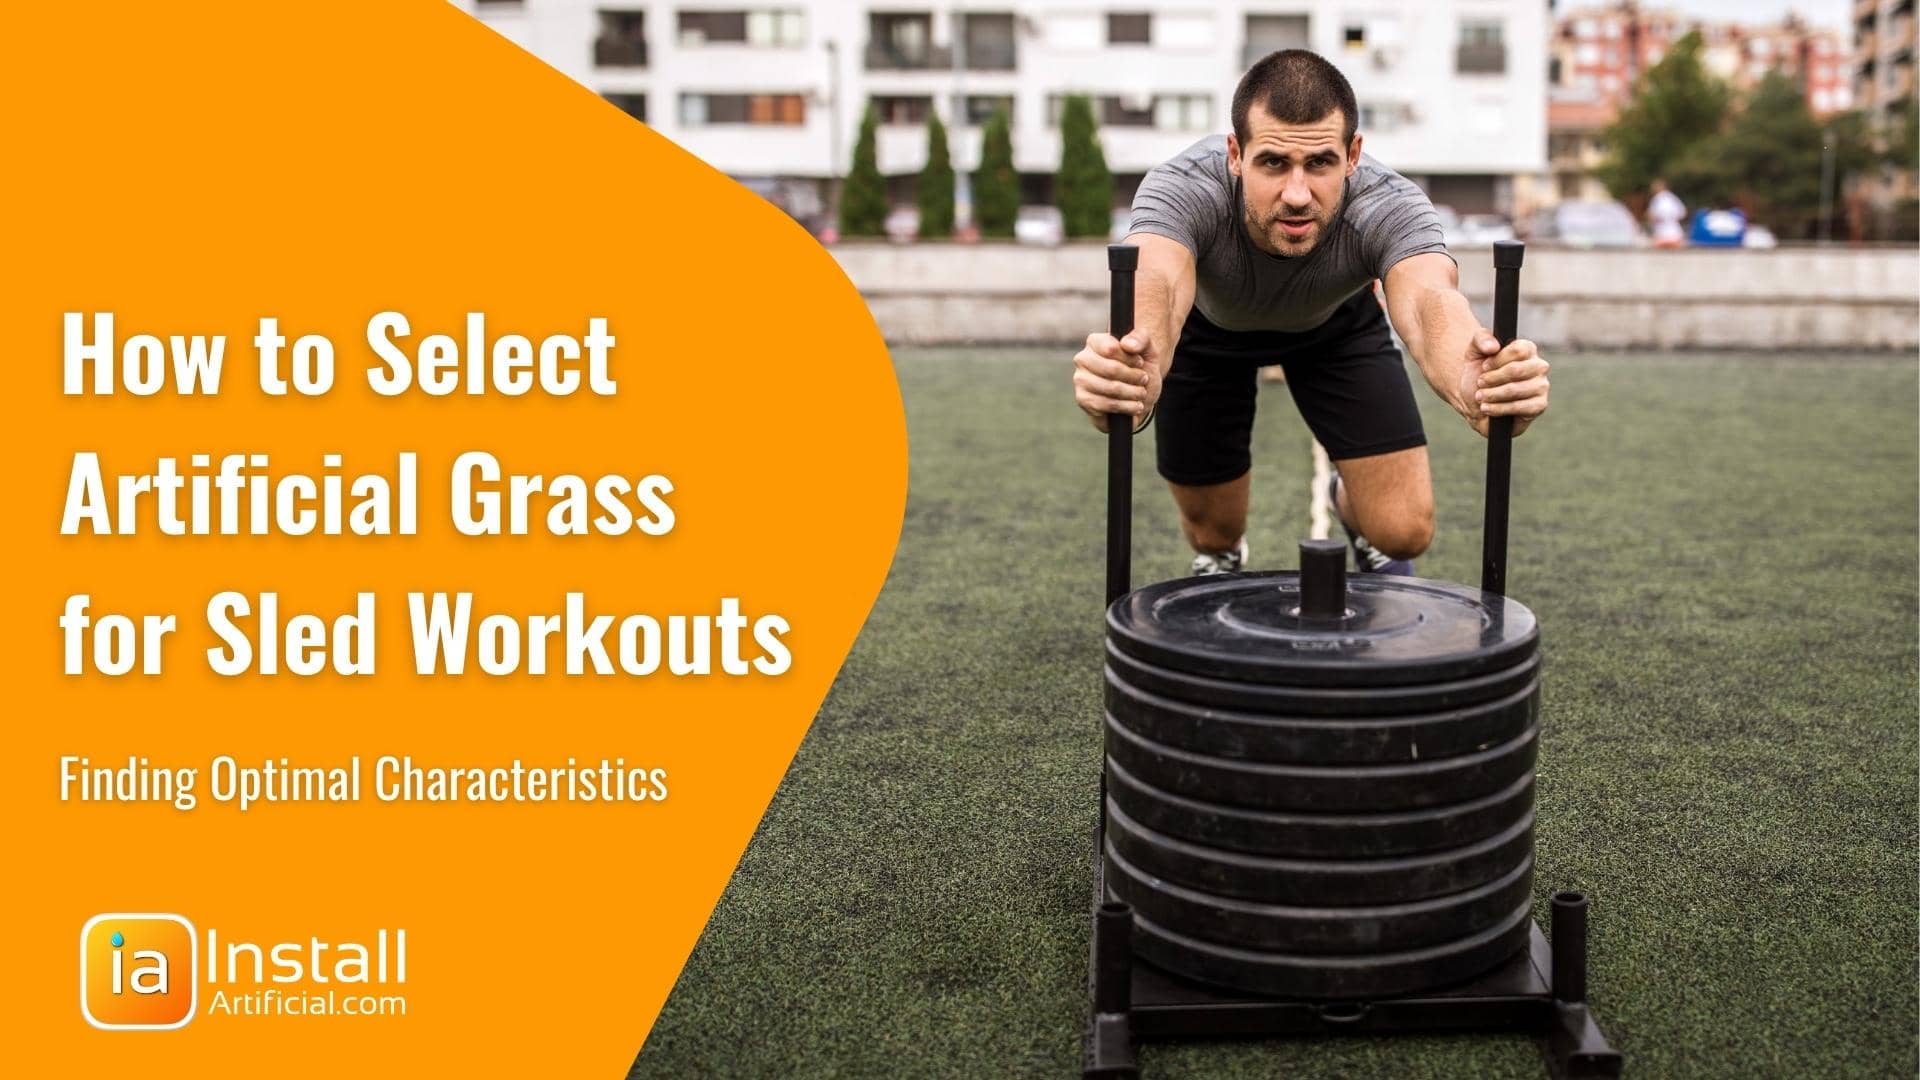 How to Select Artificial Grass for Sled Workouts